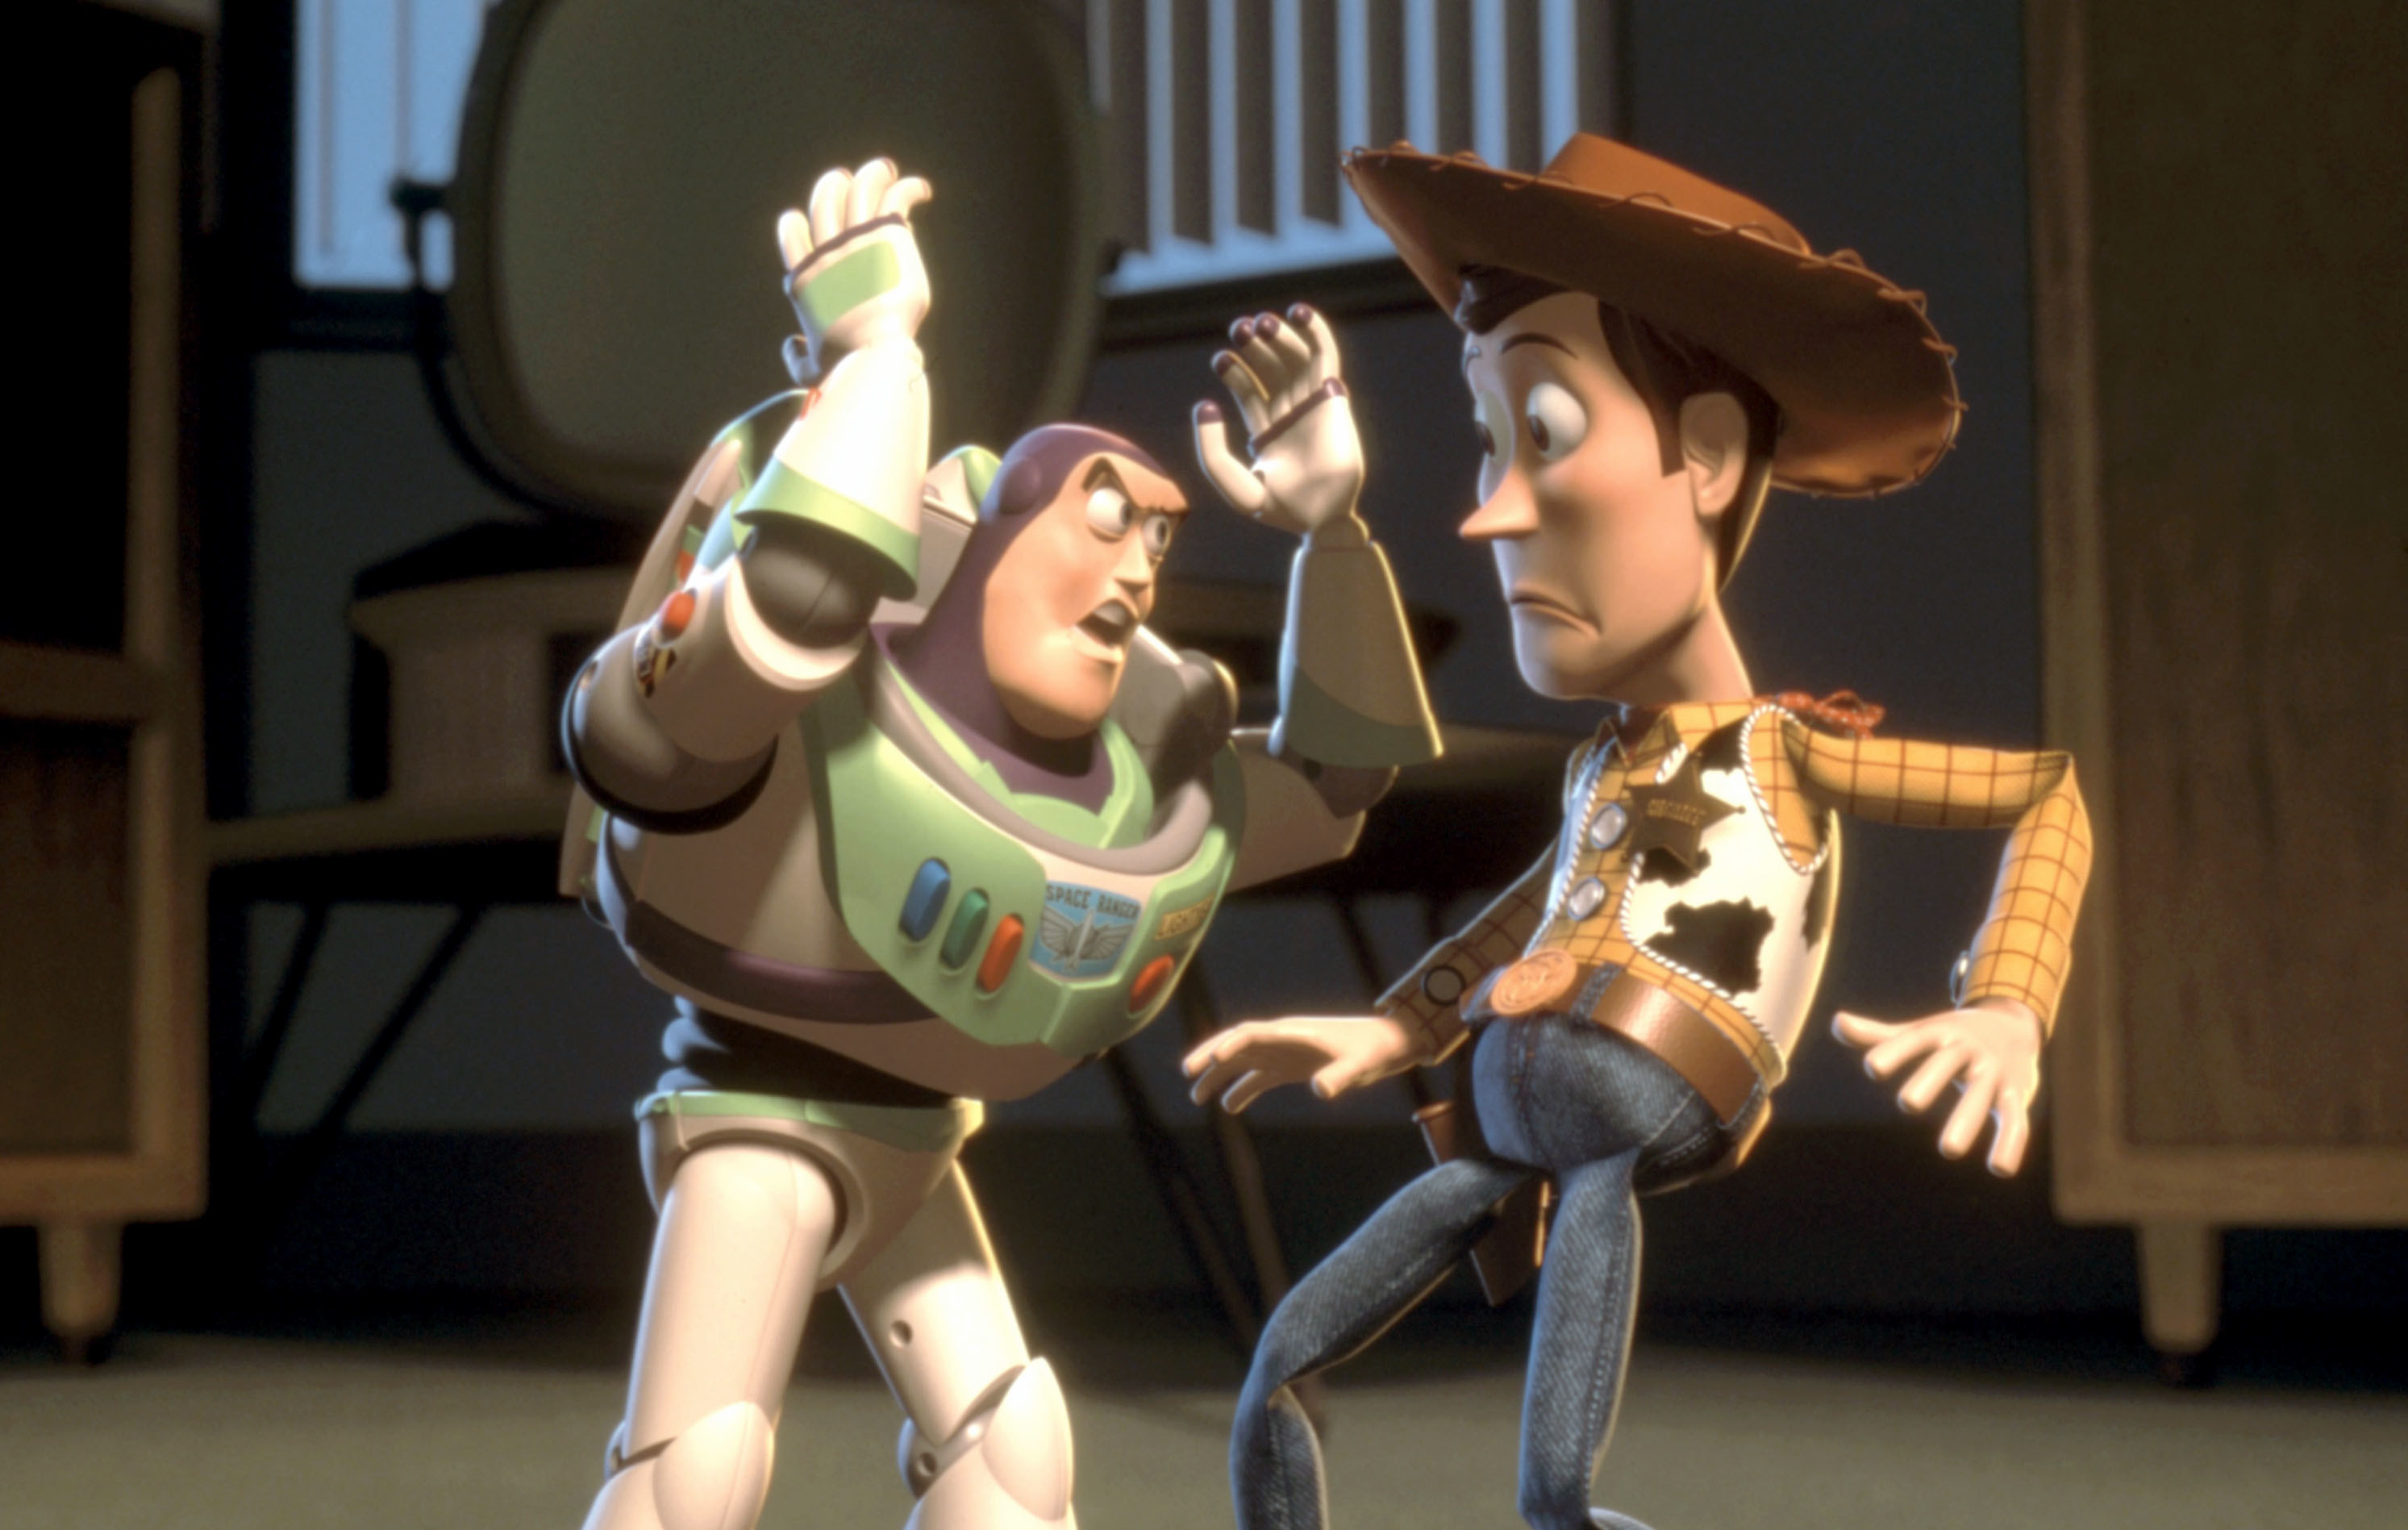 An astronaut toy argues with a cowboy toy